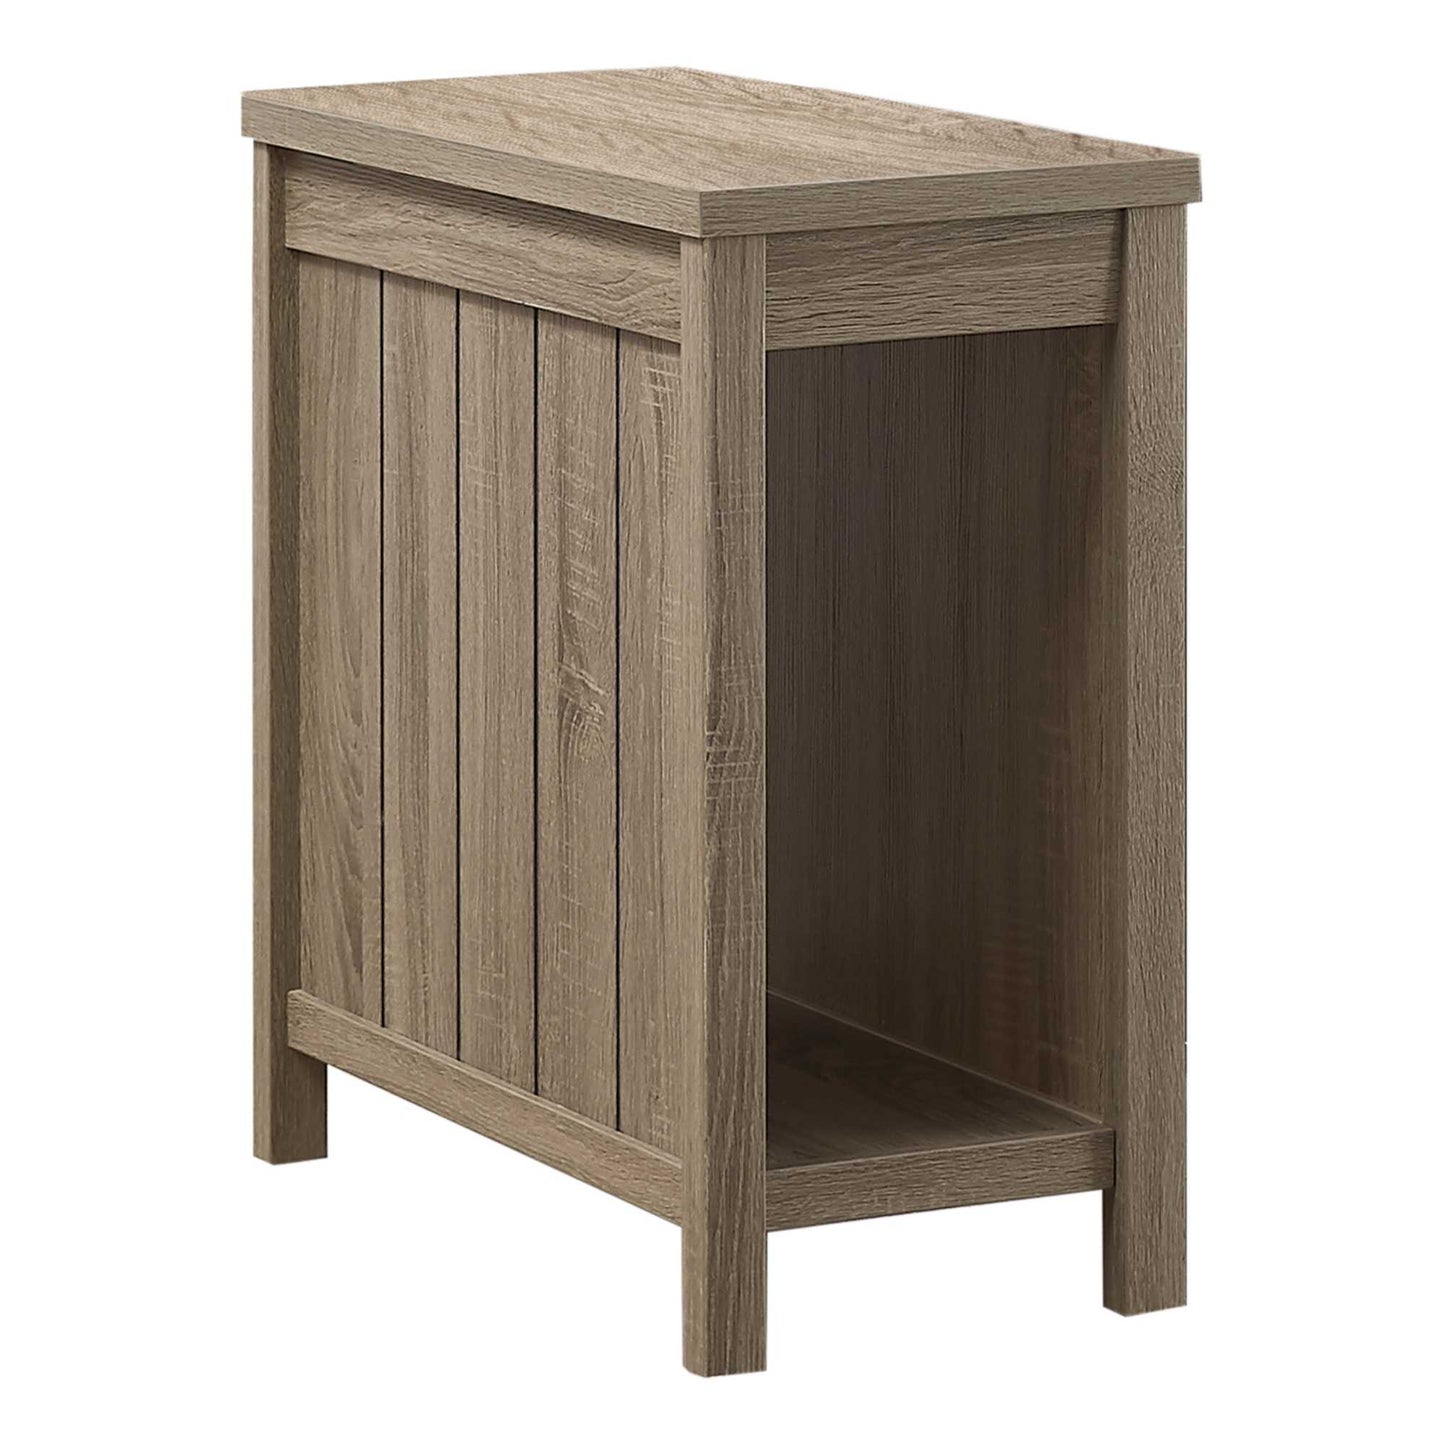 Rectangular Dark Taupe Smooth Laminated Wood Accent Table